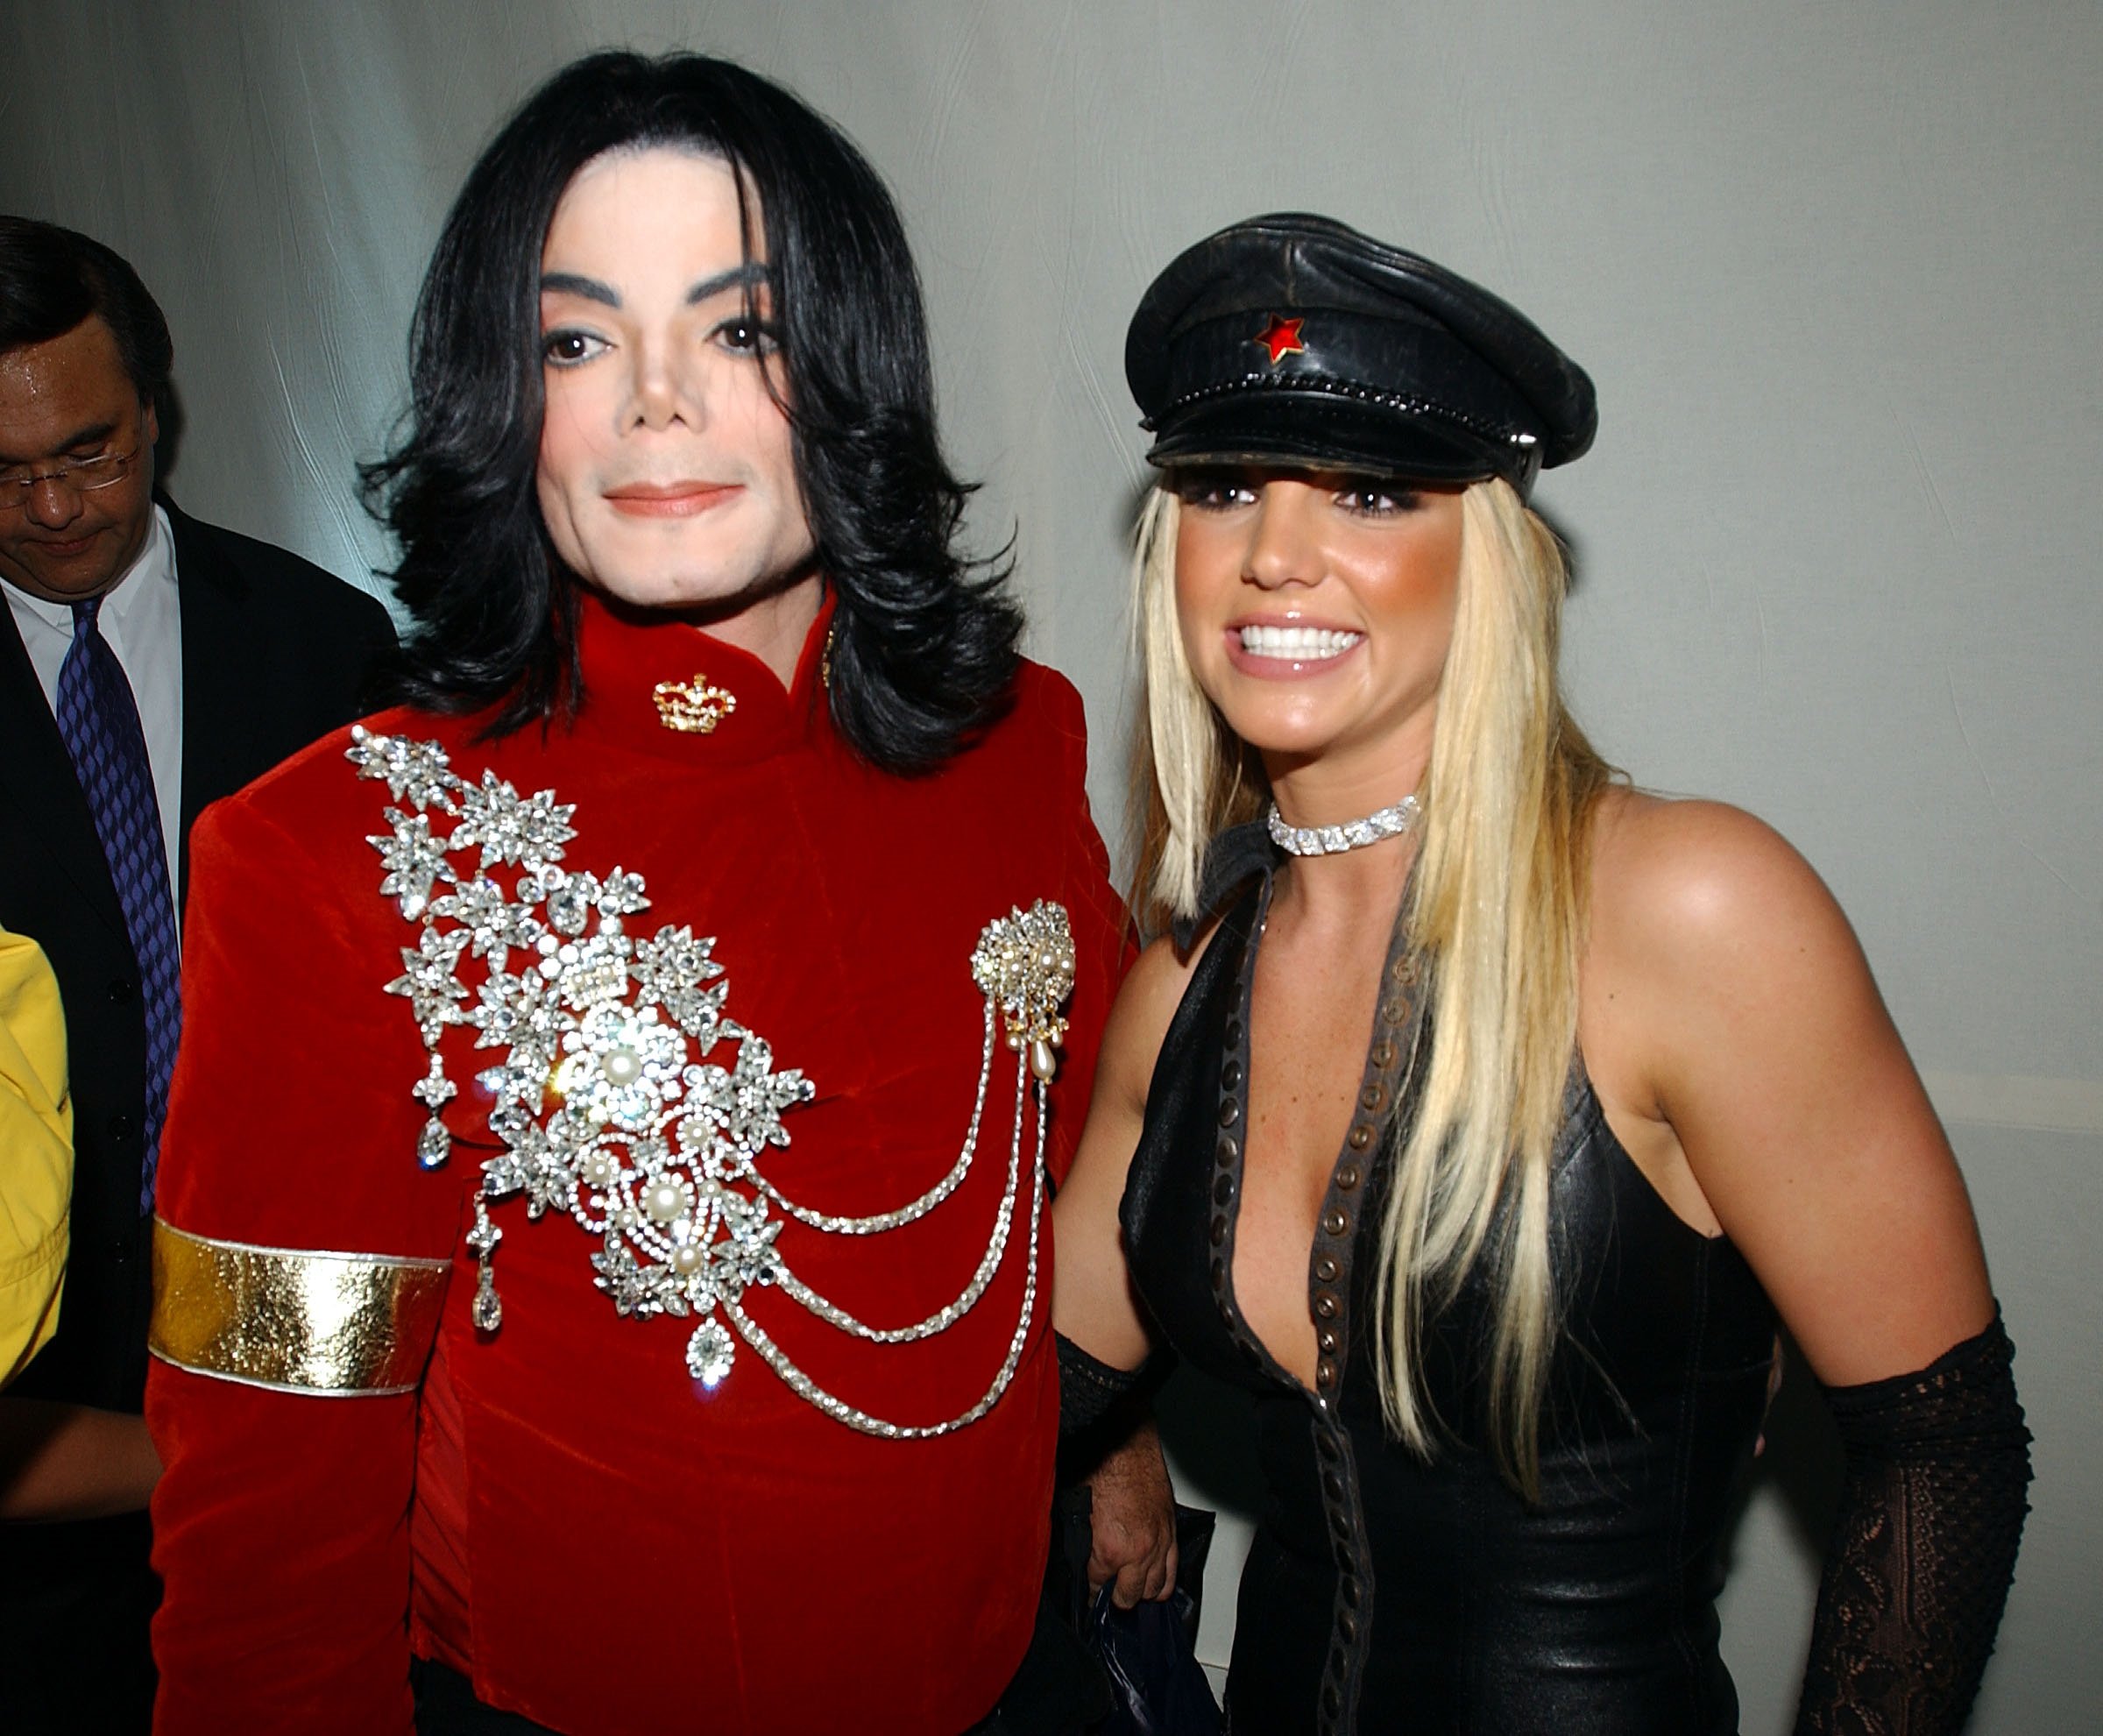 Britney Spears and Michael Jackson: Inside Their 'Obsession' With Each Other